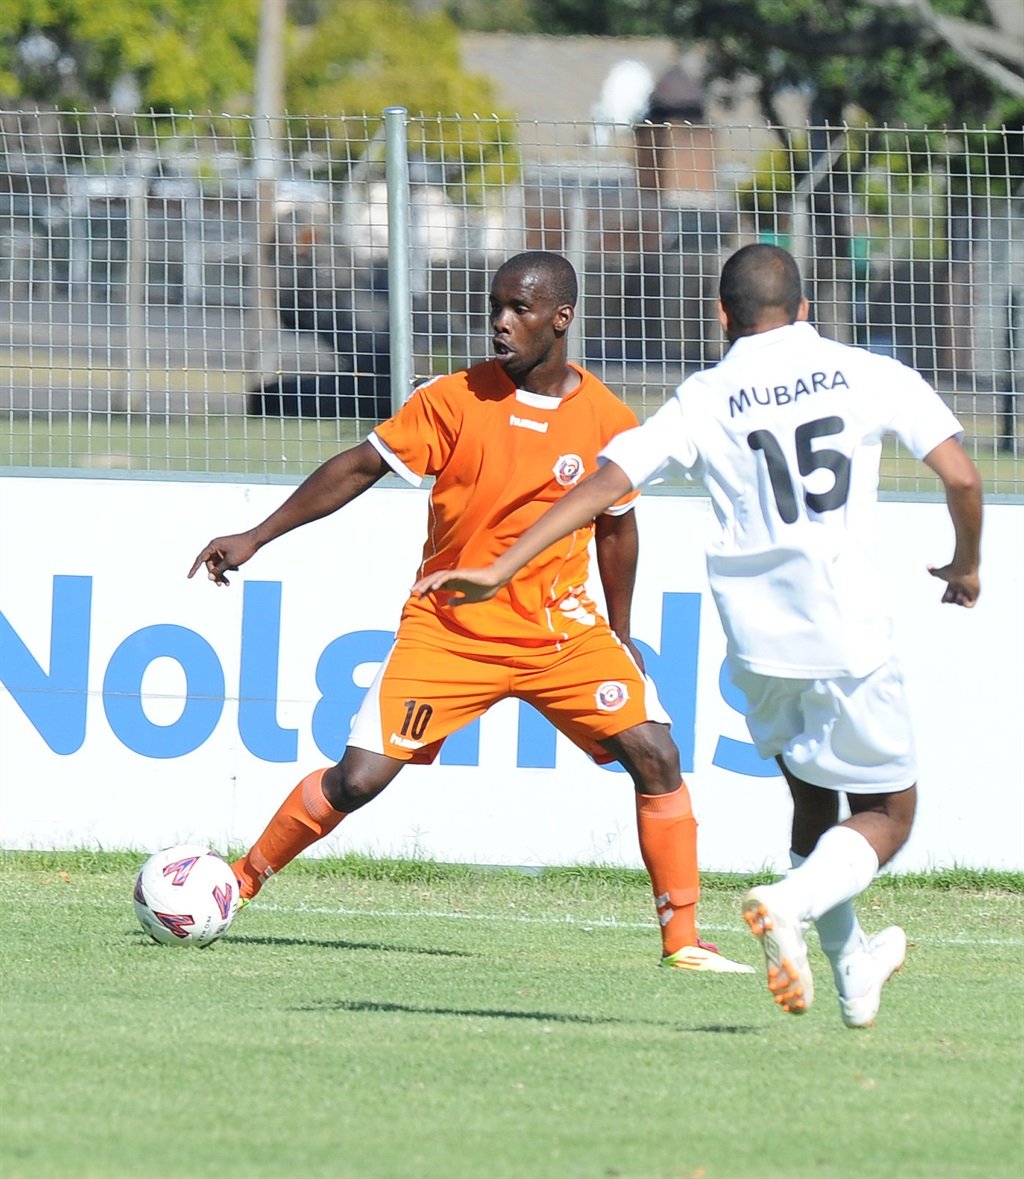 CAPE TOWN, SOUTH AFRICA - DECEMBER 17, Thamsanqa Tibe of Dynamos FC during the National First Division match between Vasco Da Gama and Dynamos from Bellville Stadium on December 17, 2011 in Cape Town, South Africa